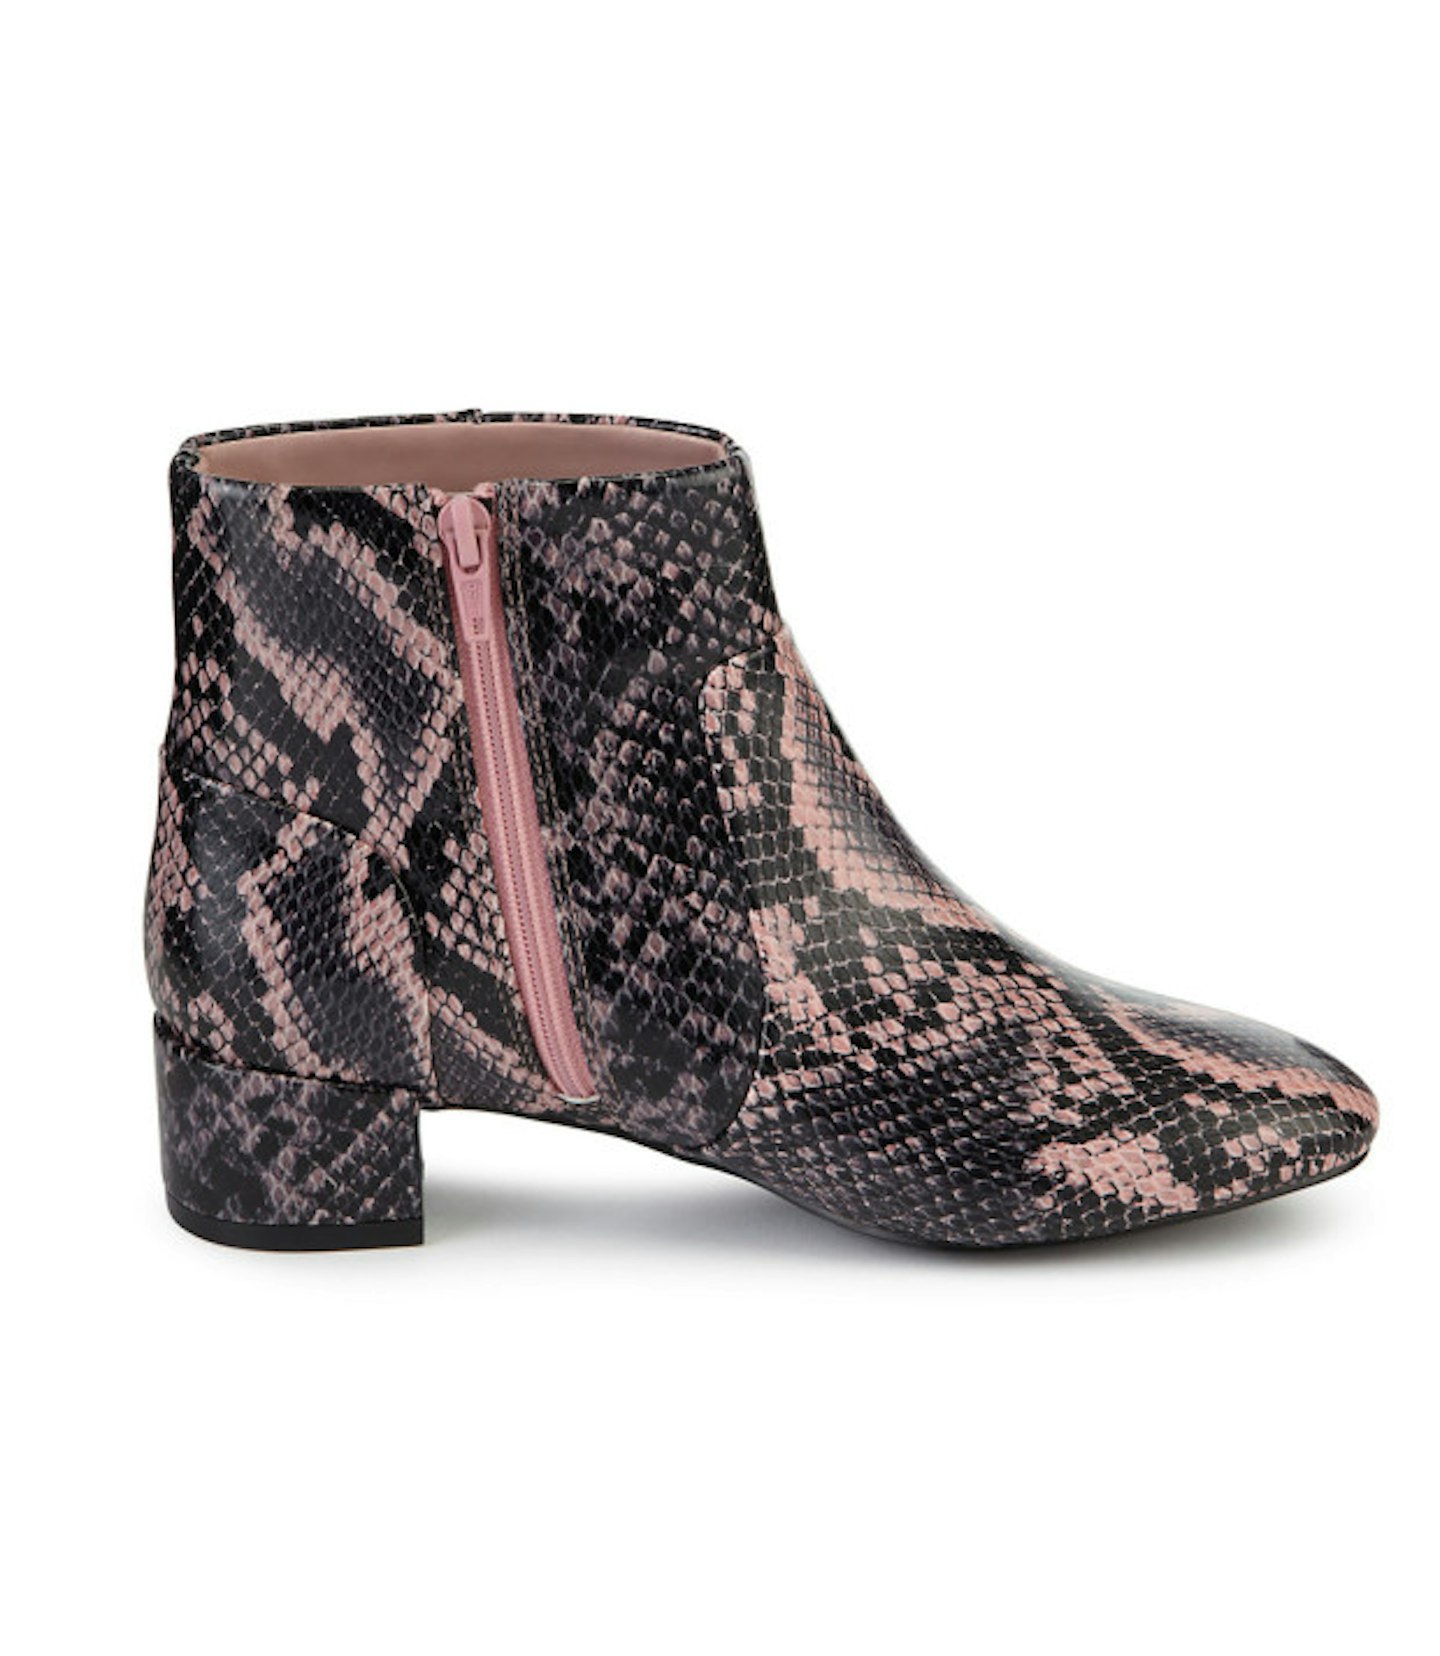 six-o-clock-shoes-marks-and-spencer-pink-snakeskin-boots